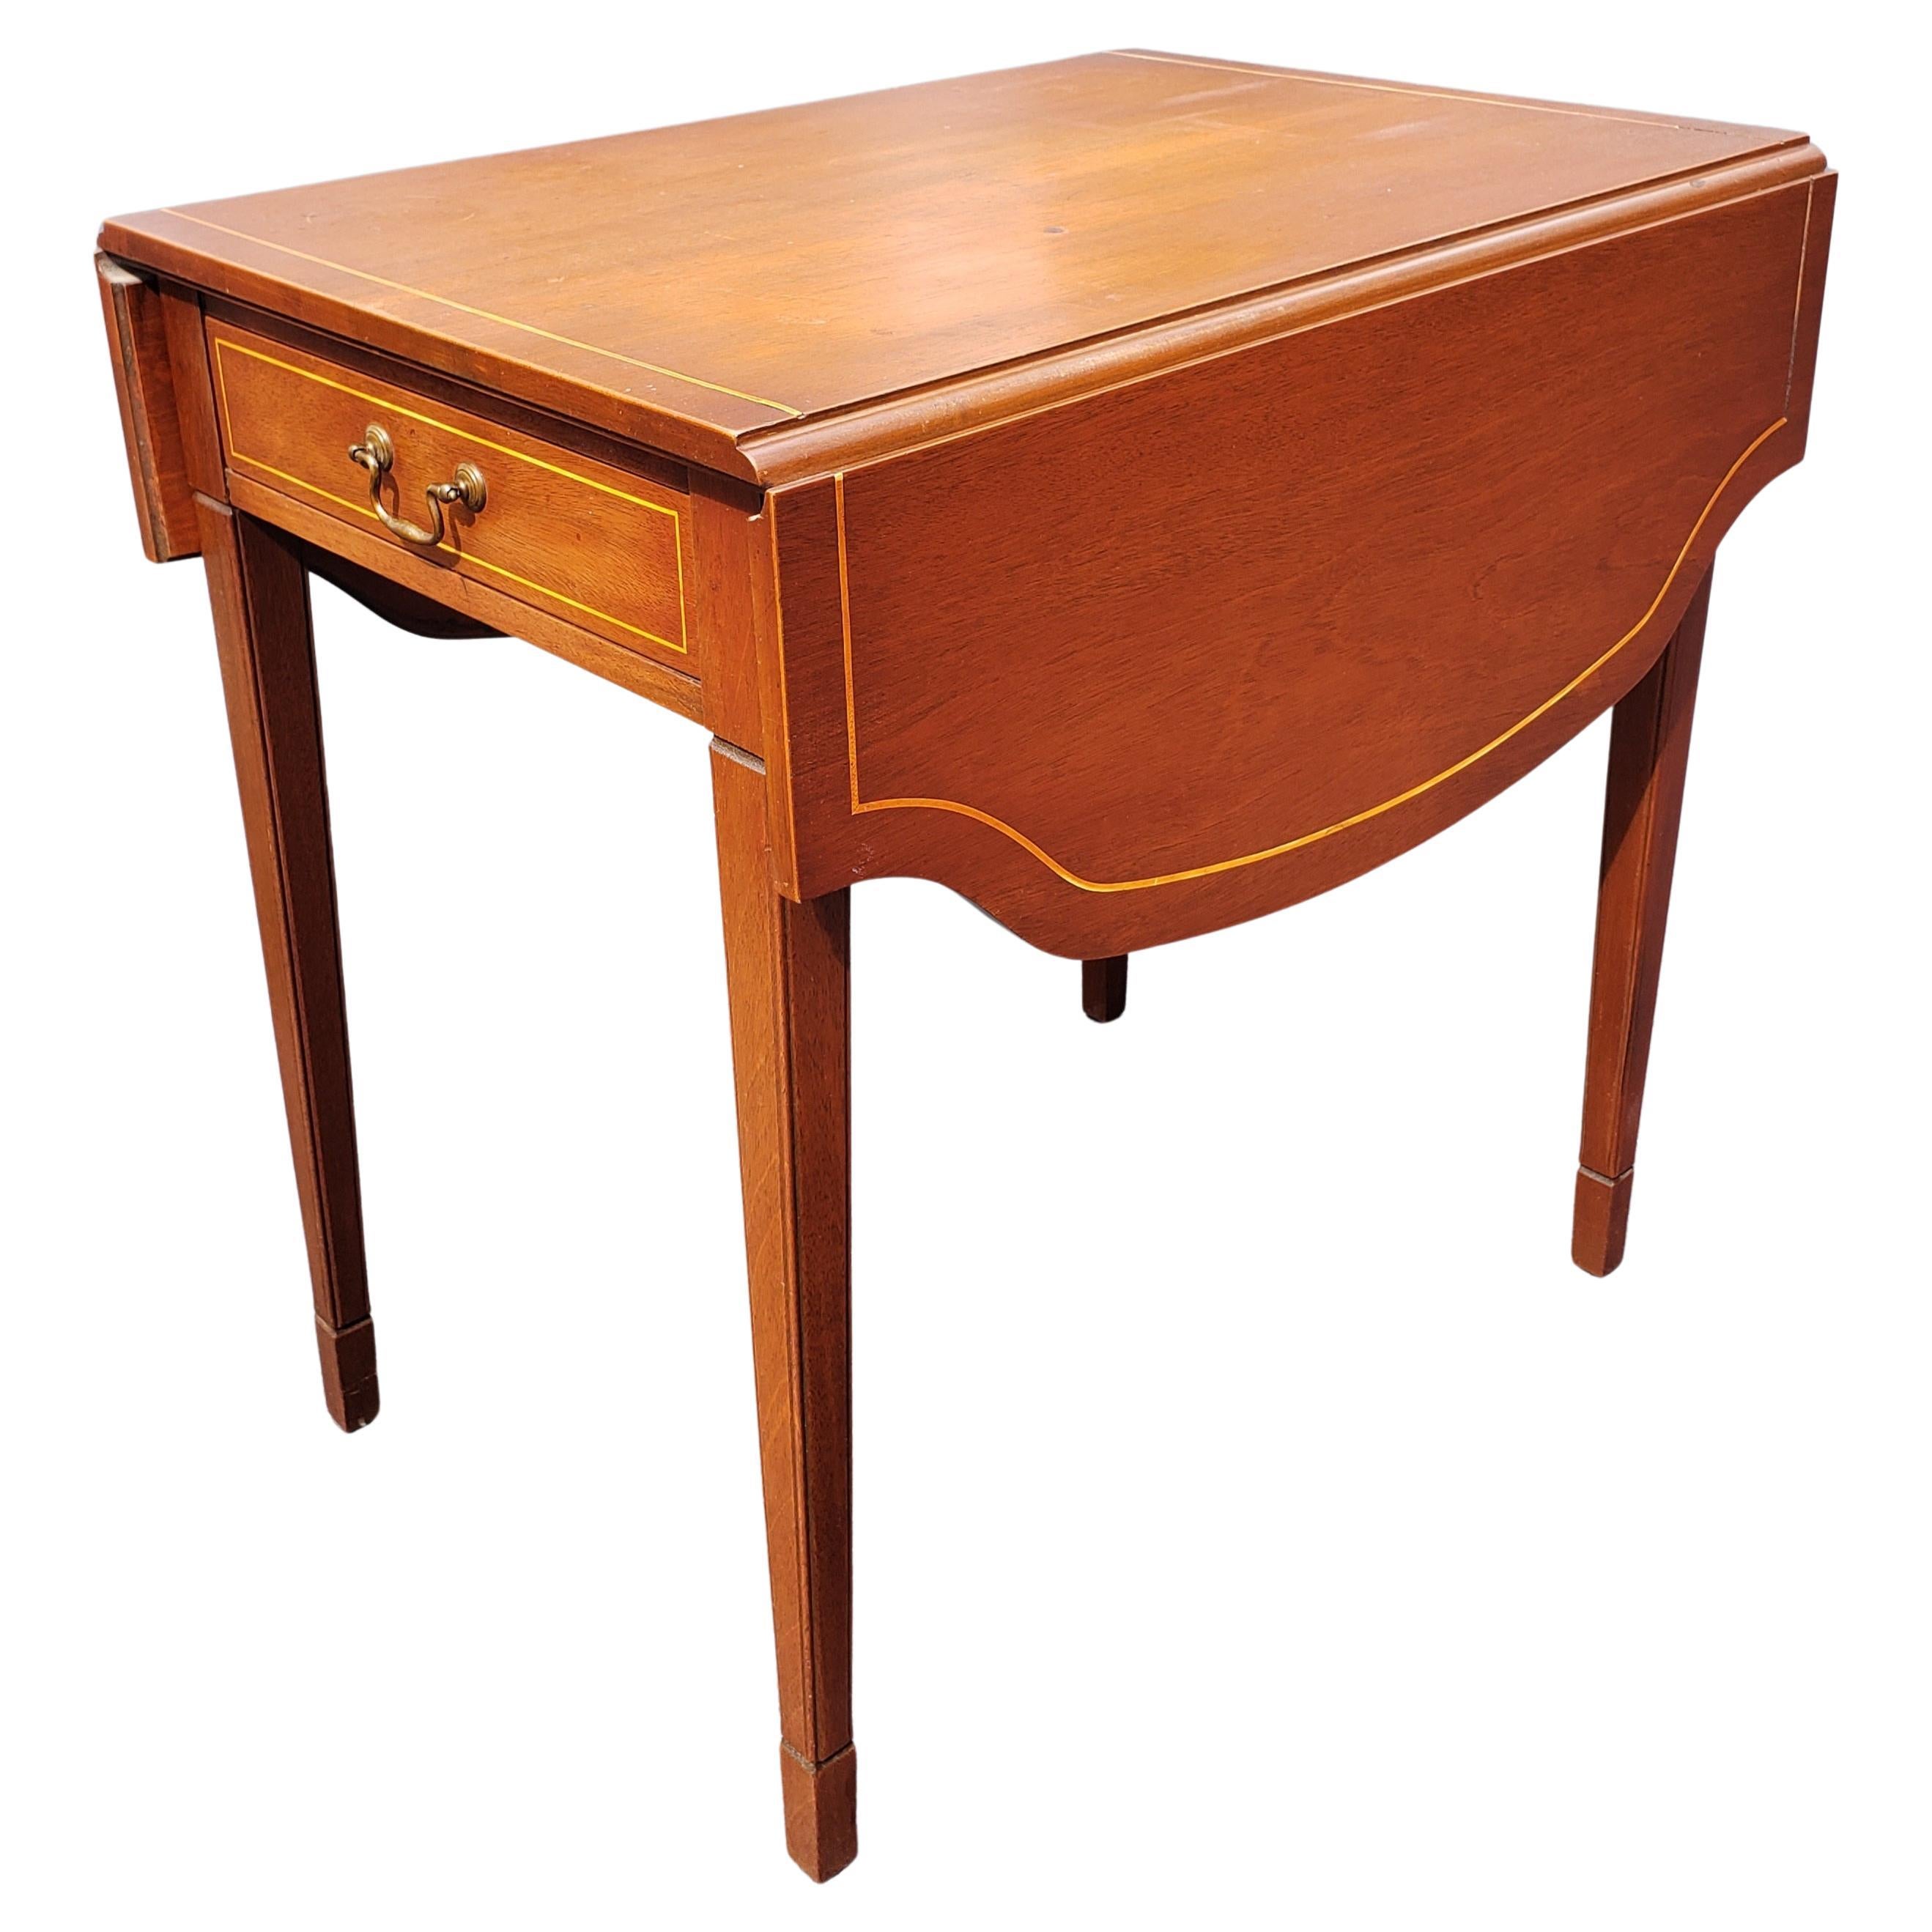 Brandt Certified Genuine Mahogany Pembroke Drop-Leaf Tables, a Pair, circa 1940s In Good Condition For Sale In Germantown, MD